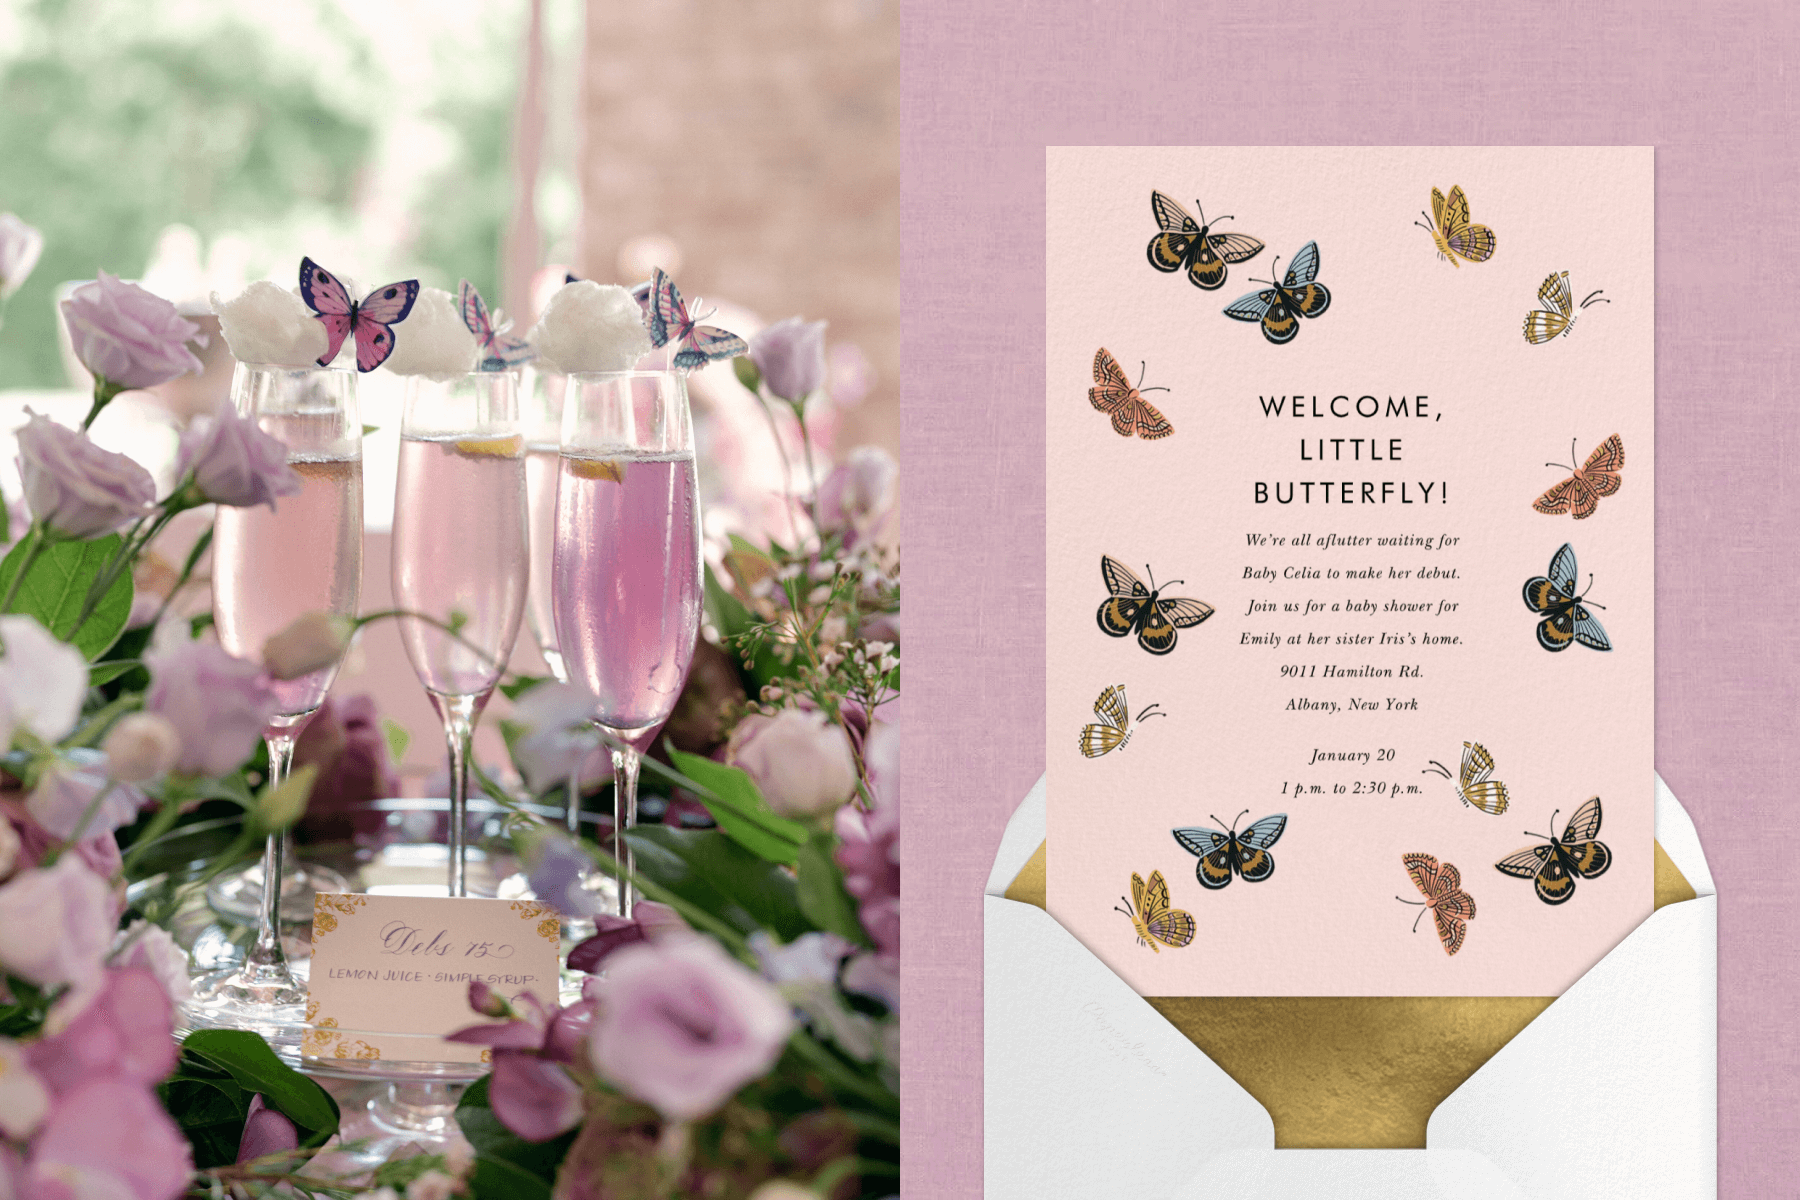 Three purple drinks in Champagne flutes with matching flowers and butterfly garnishes; an invitation with colorful butterflies.